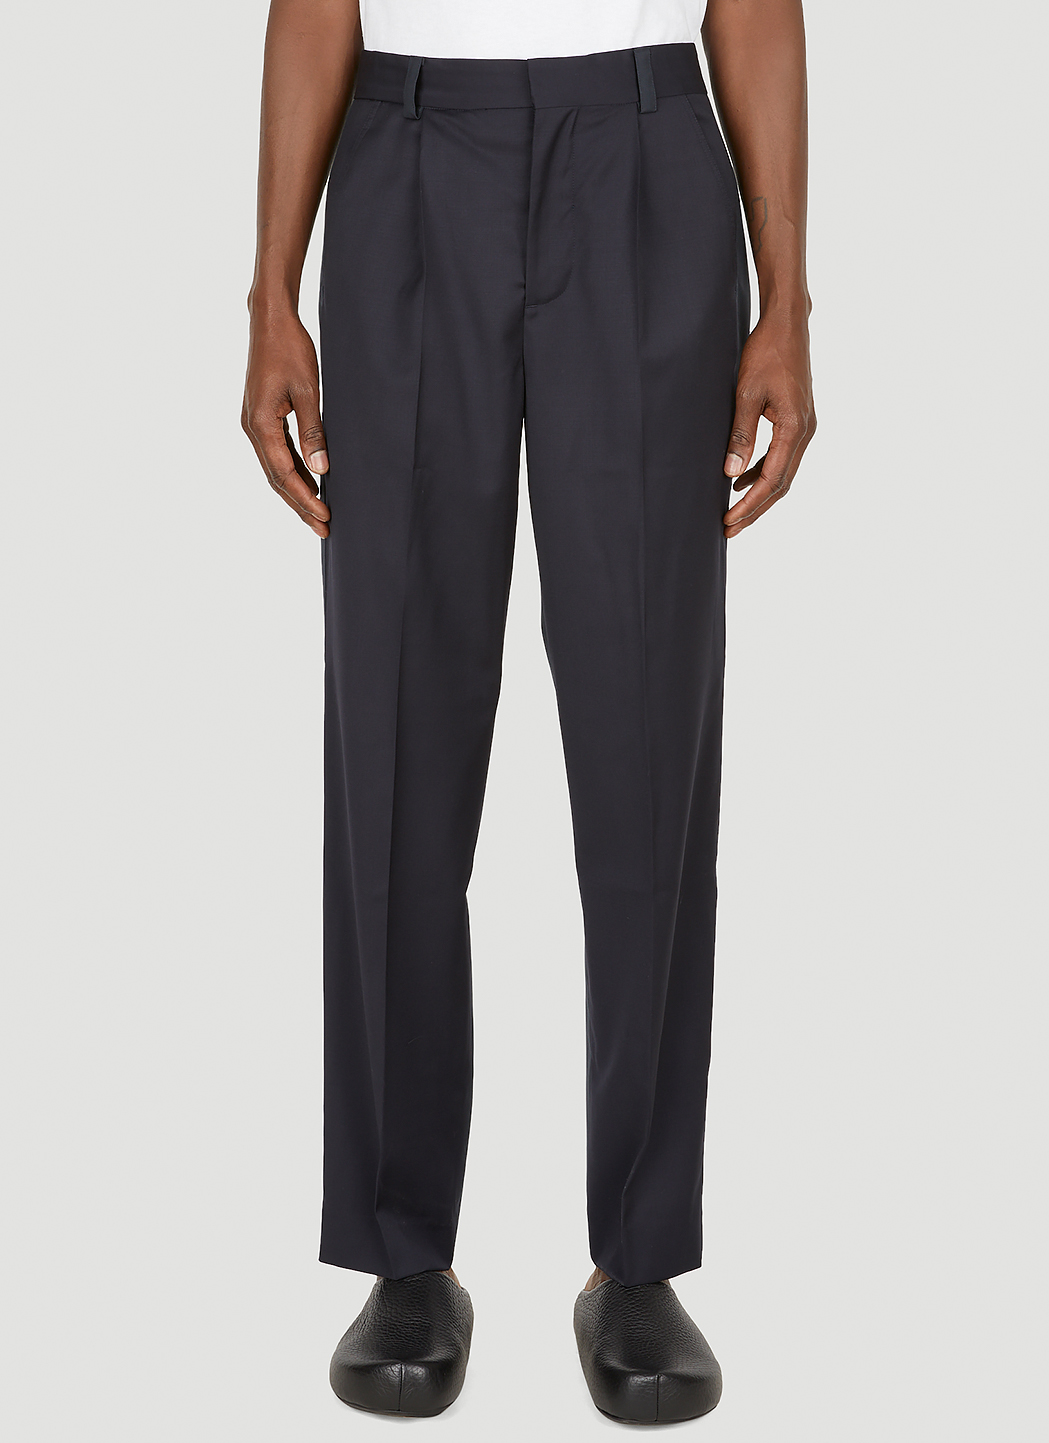 ANOTHER ASPECT Tailored Contrast Panel Pants